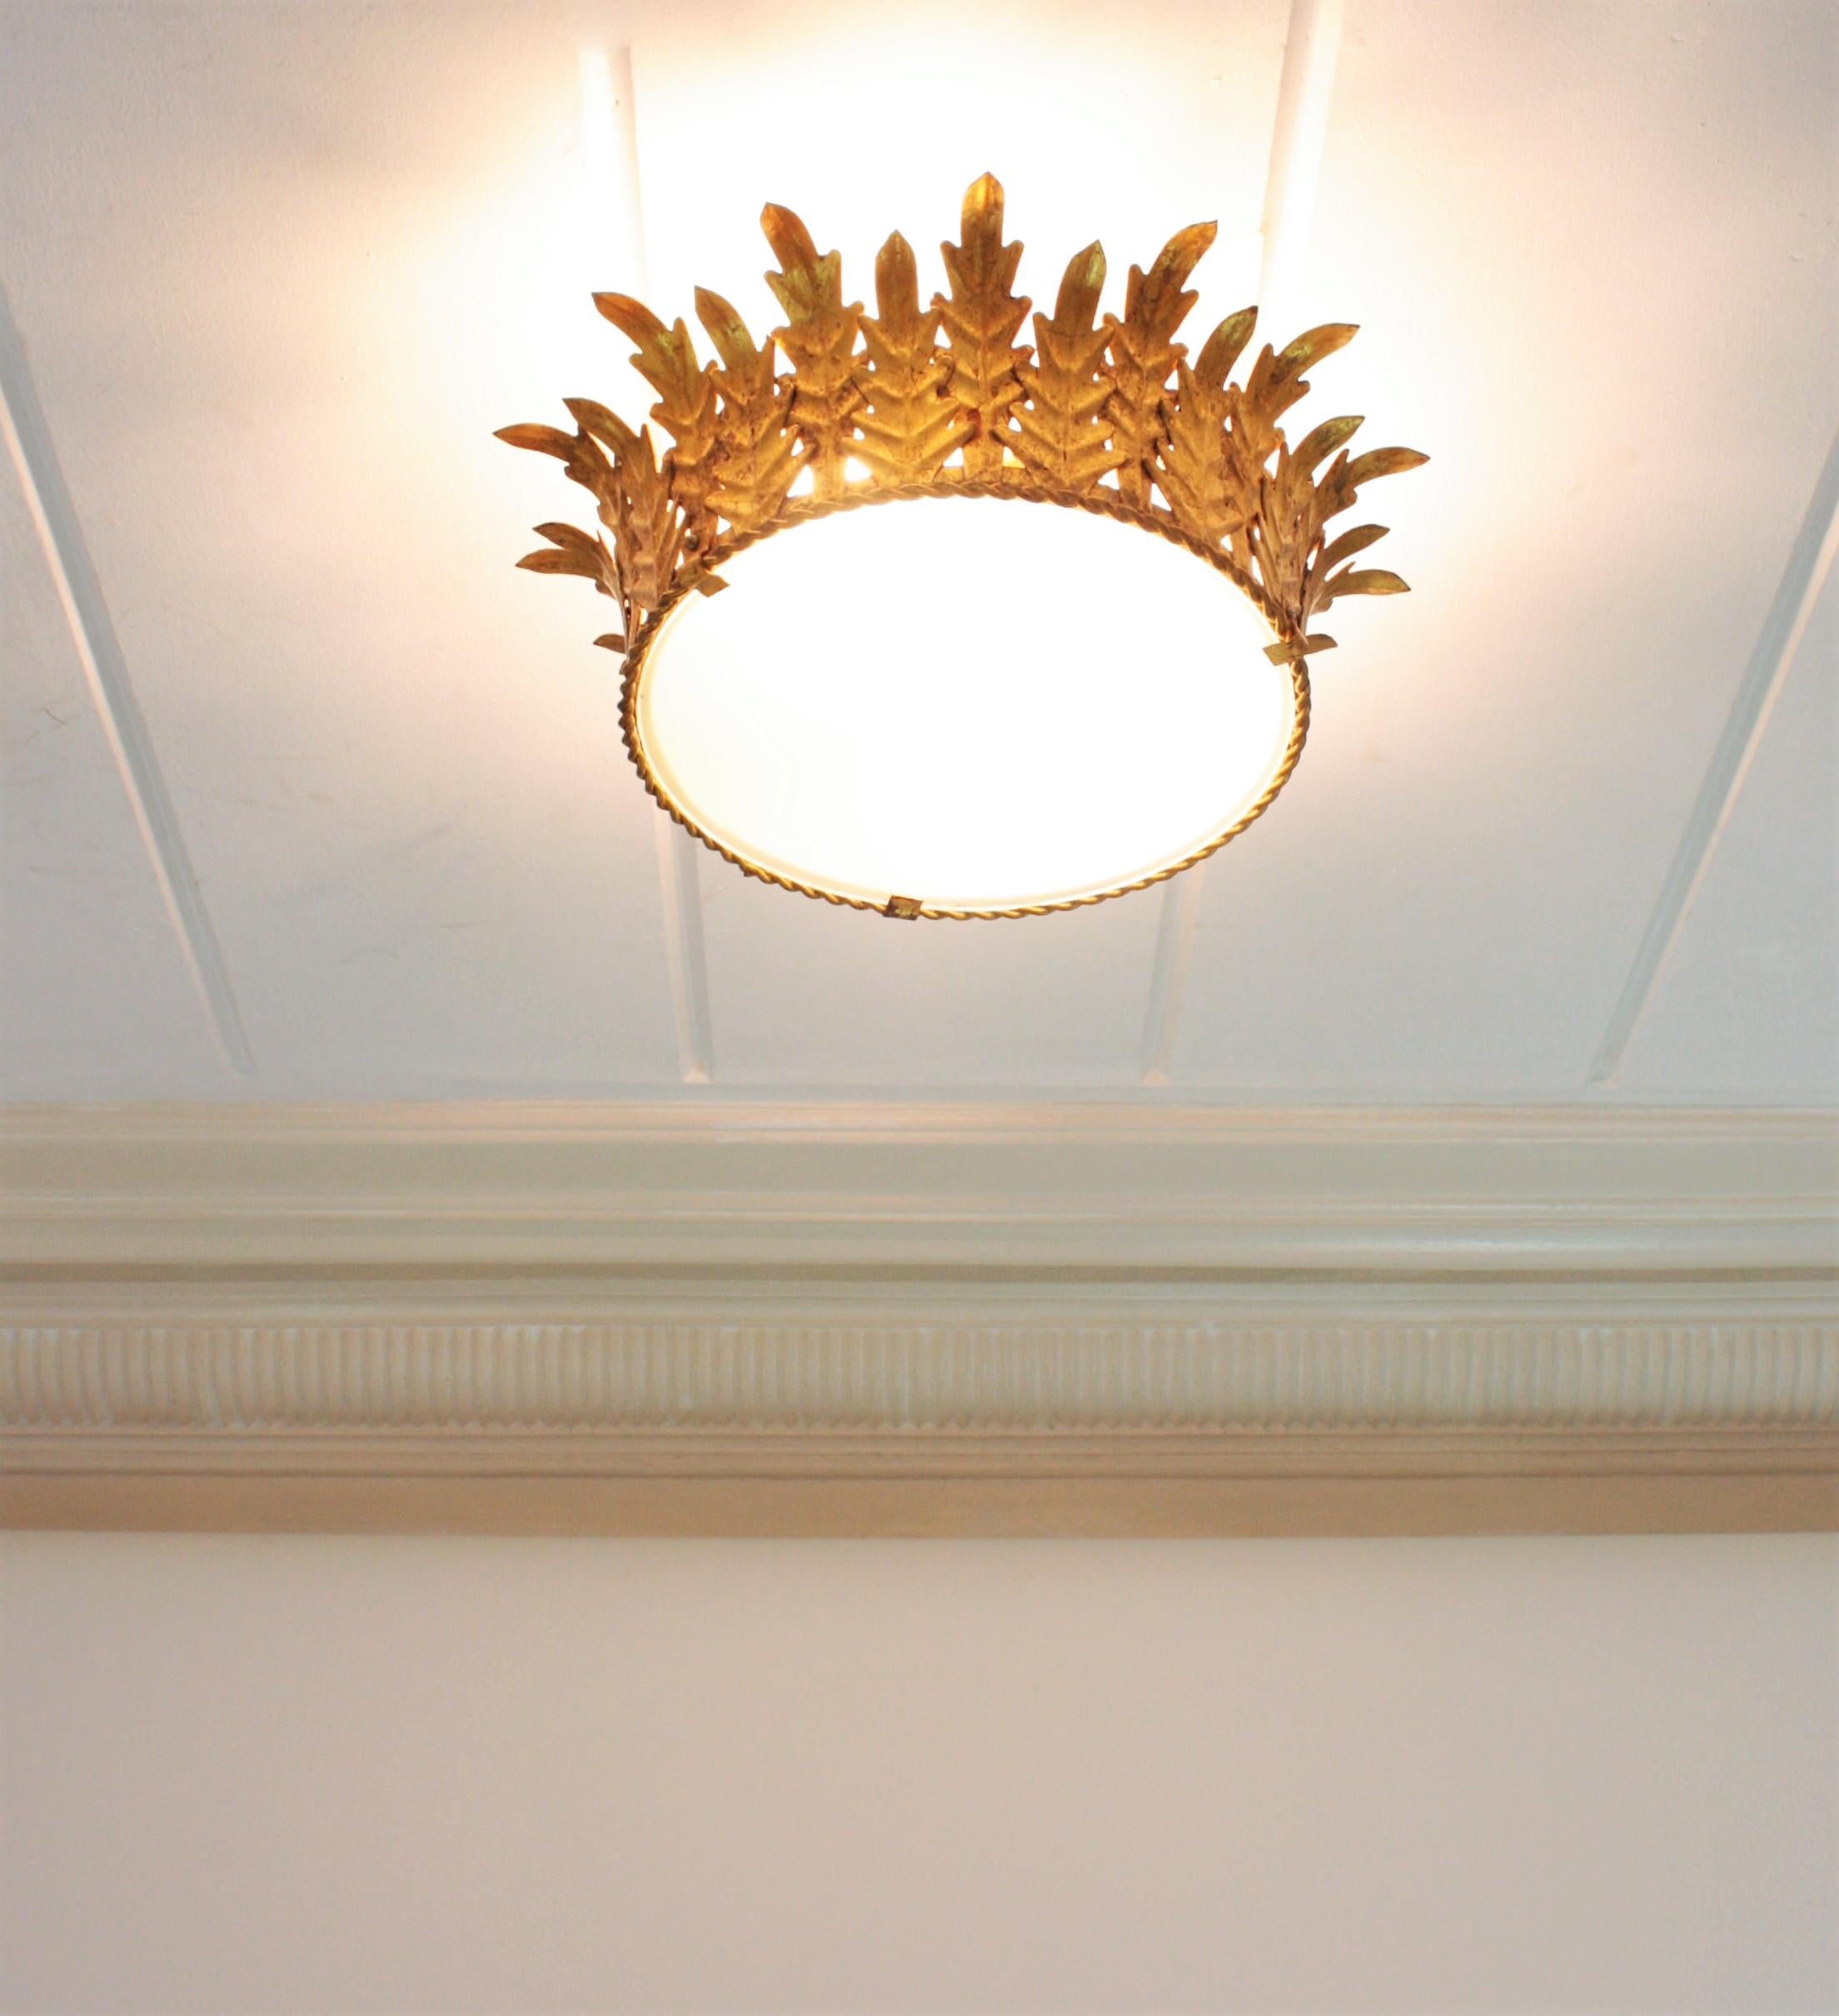 Mid-Century Modern Large Crown Shaped Ceiling Light Fixture or Pendant in Gilt Metal